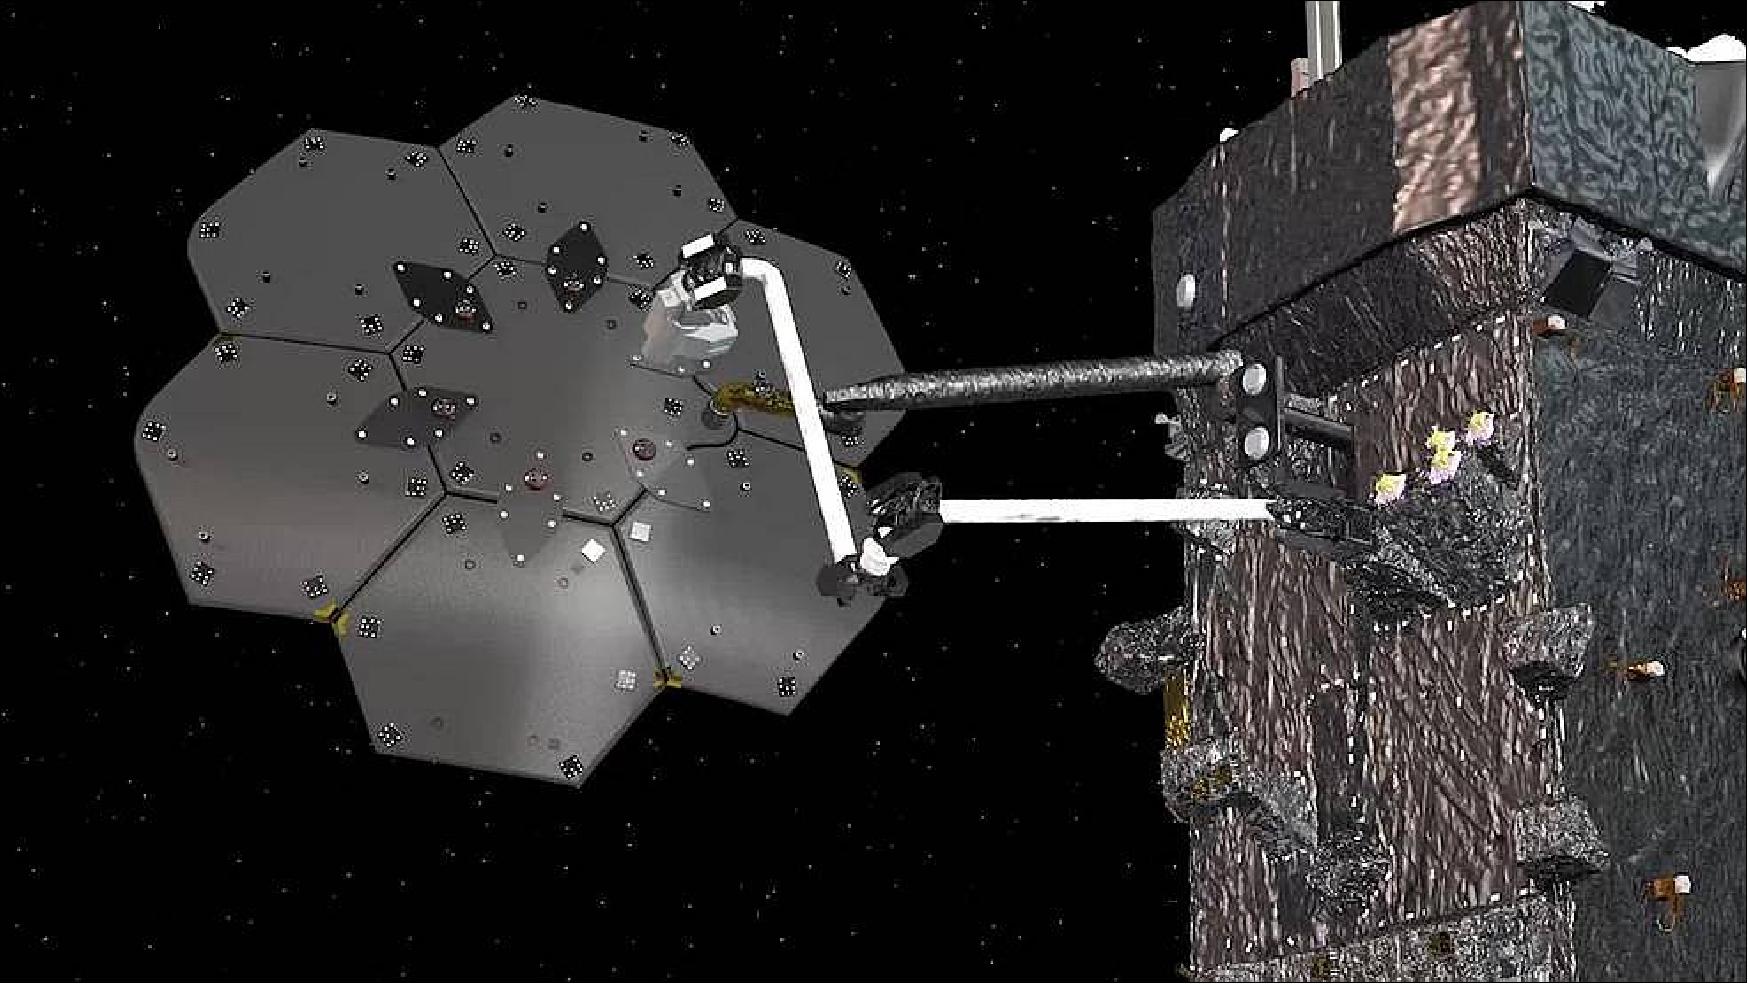 Figure 14: The Space Infrastructure Dexterous Robot (SPIDER) technology demonstration is slated to take place on NASA's OSAM-1 (former Restore-L) spacecraft. The payload will assemble a functional communications antenna and manufacture a spacecraft beam (image credit: Maxar Technologies)